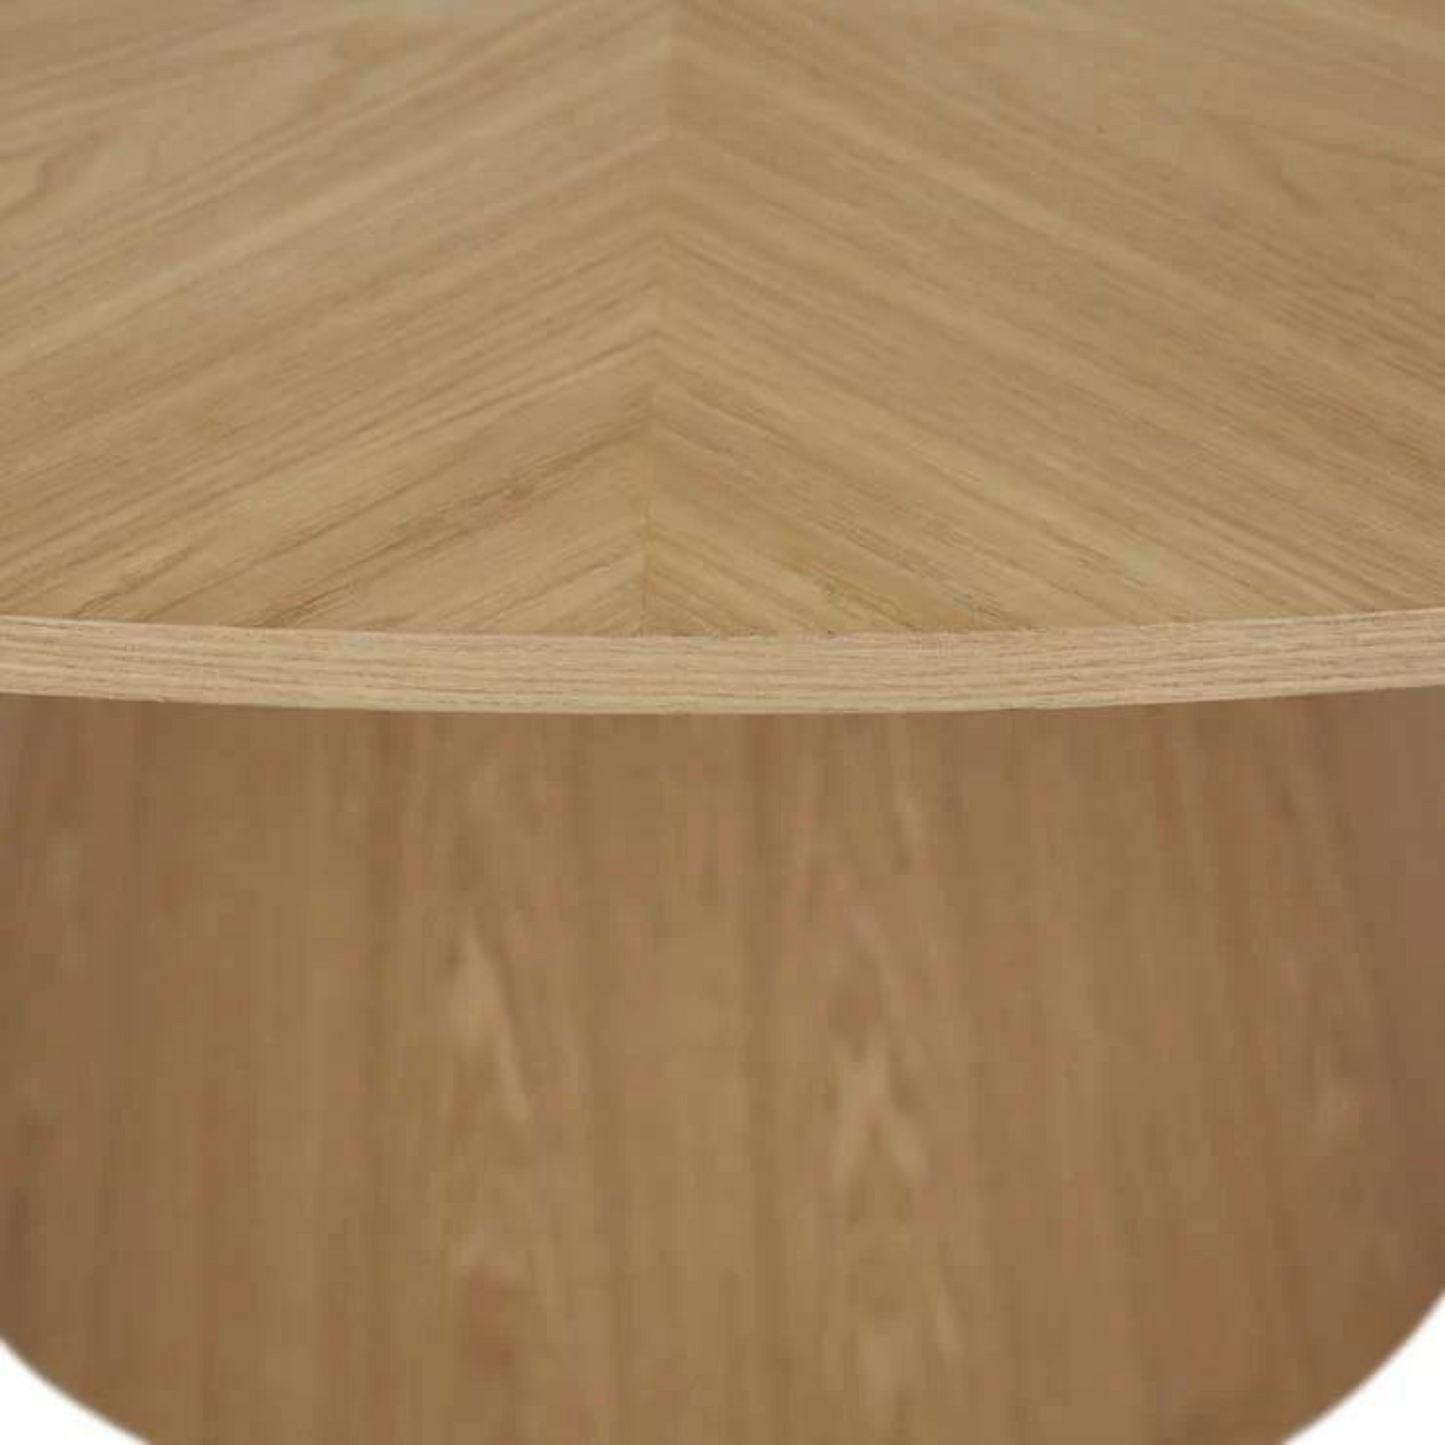 Classique 1800mm Round Dining Table